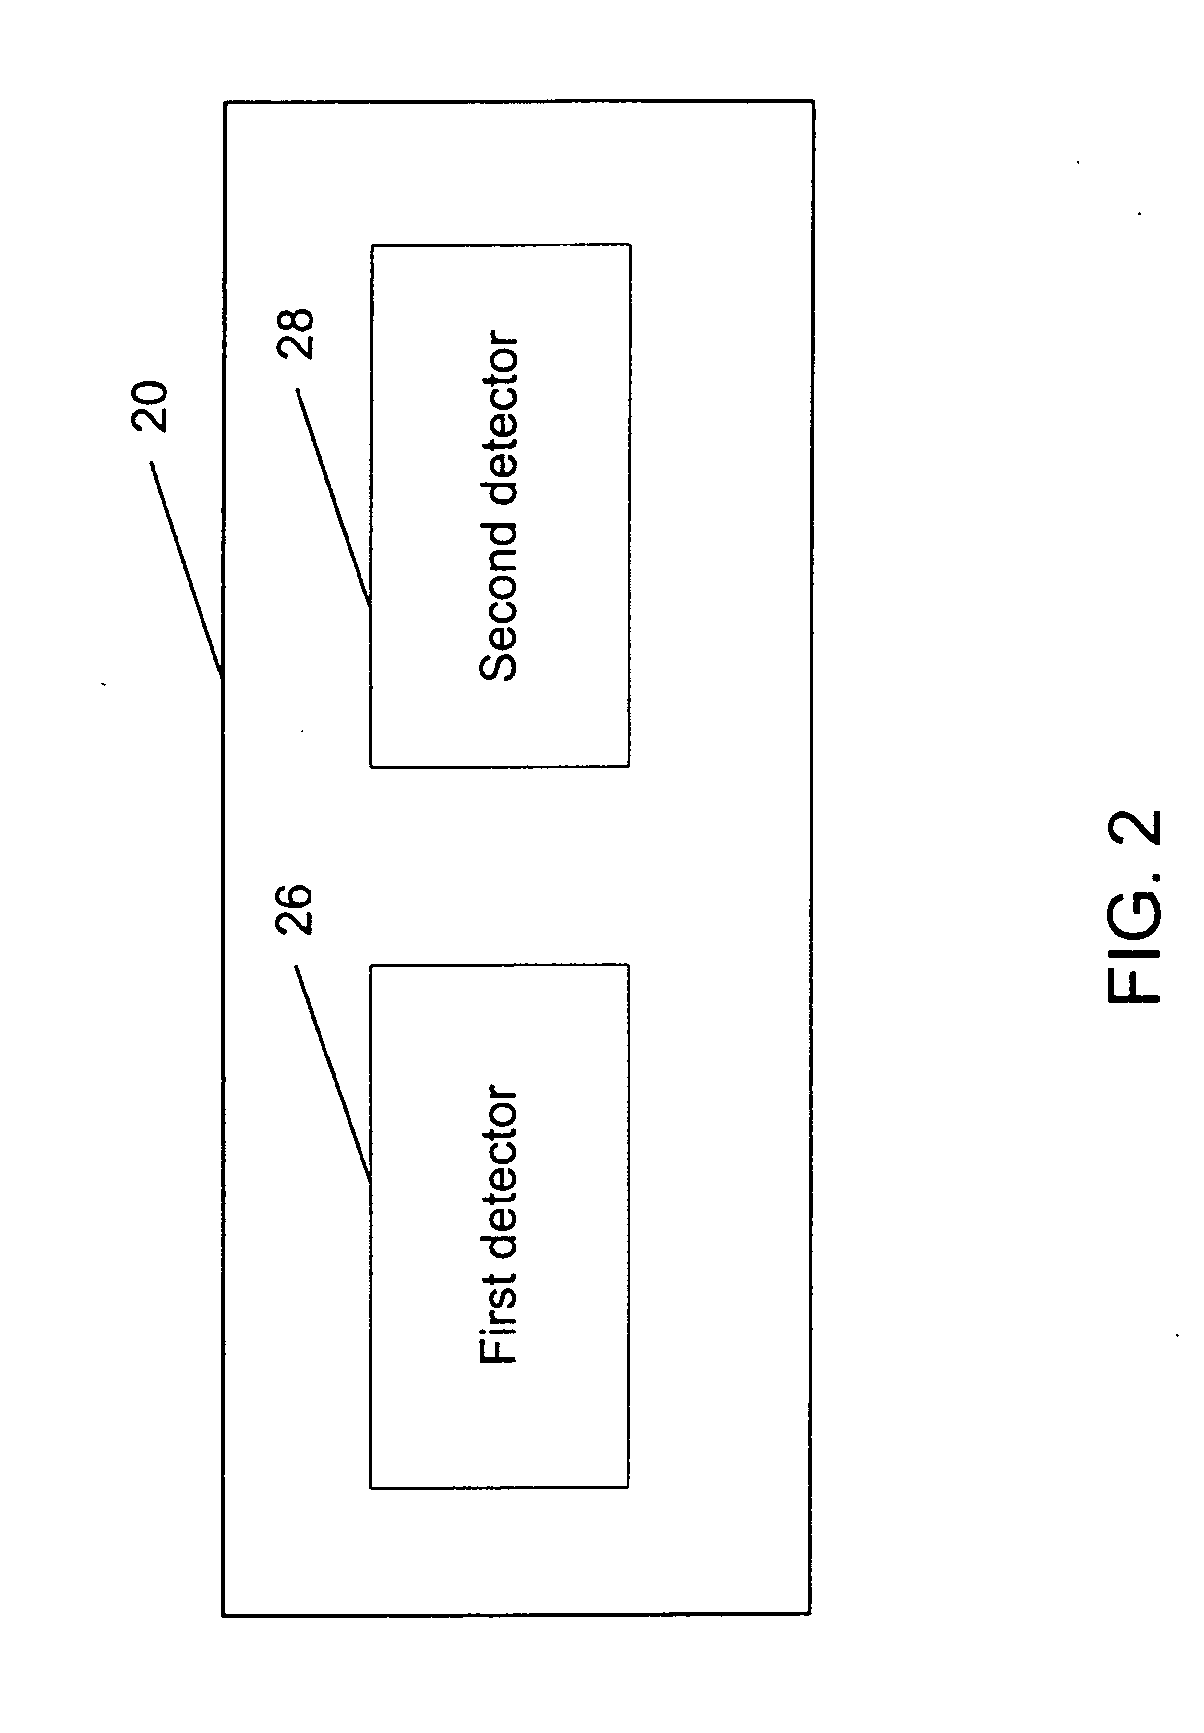 Apparatus and method for reducing noise for moveable target